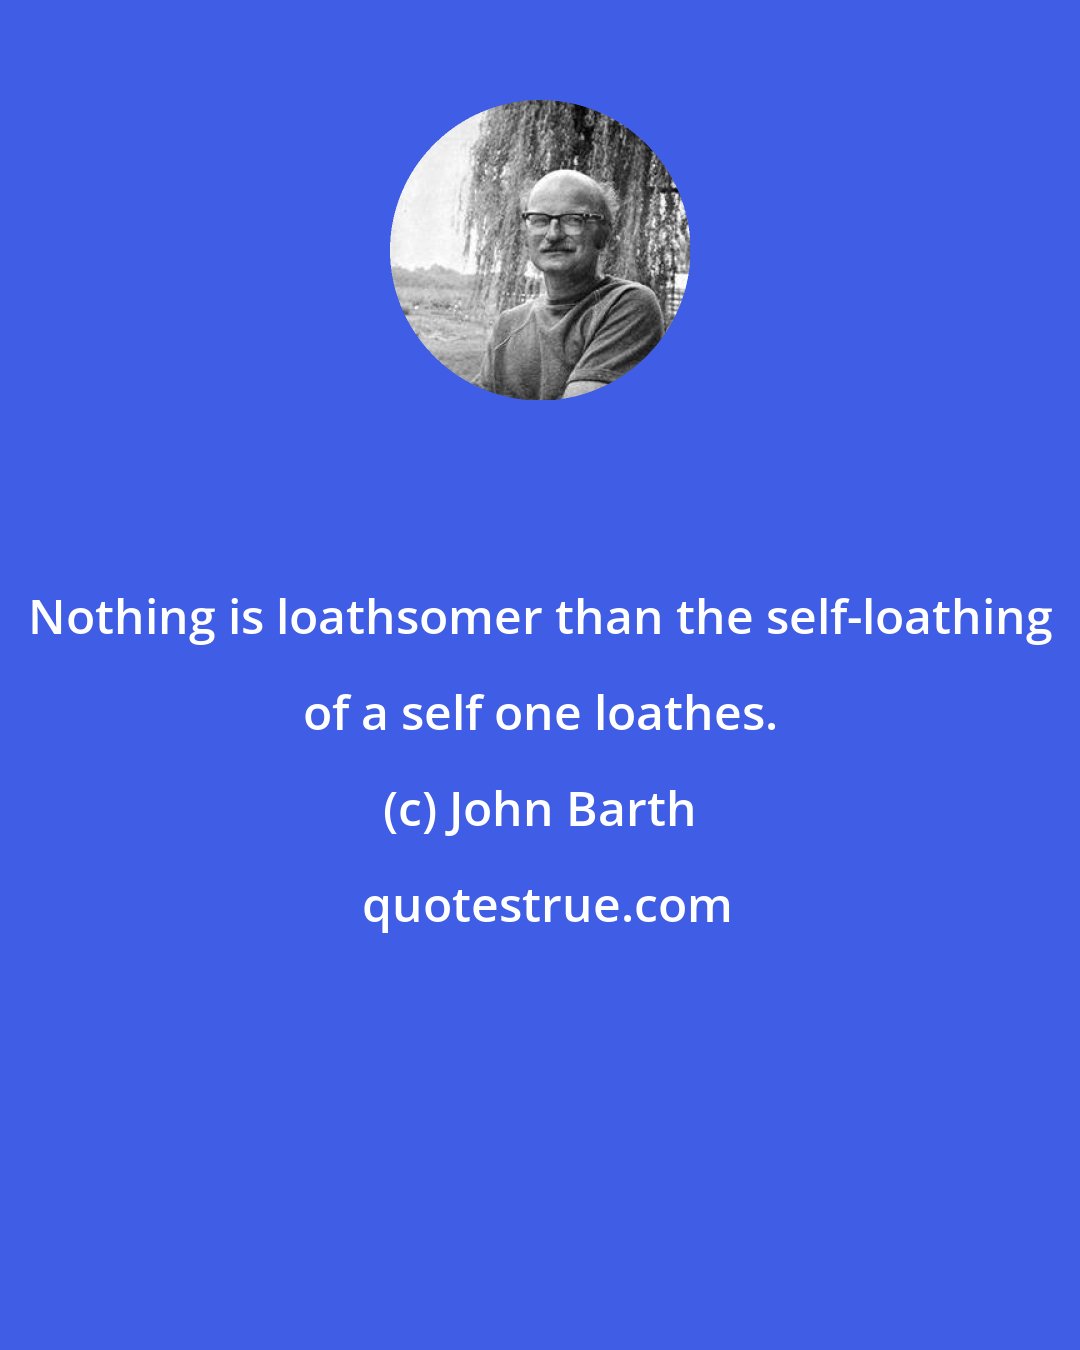 John Barth: Nothing is loathsomer than the self-loathing of a self one loathes.